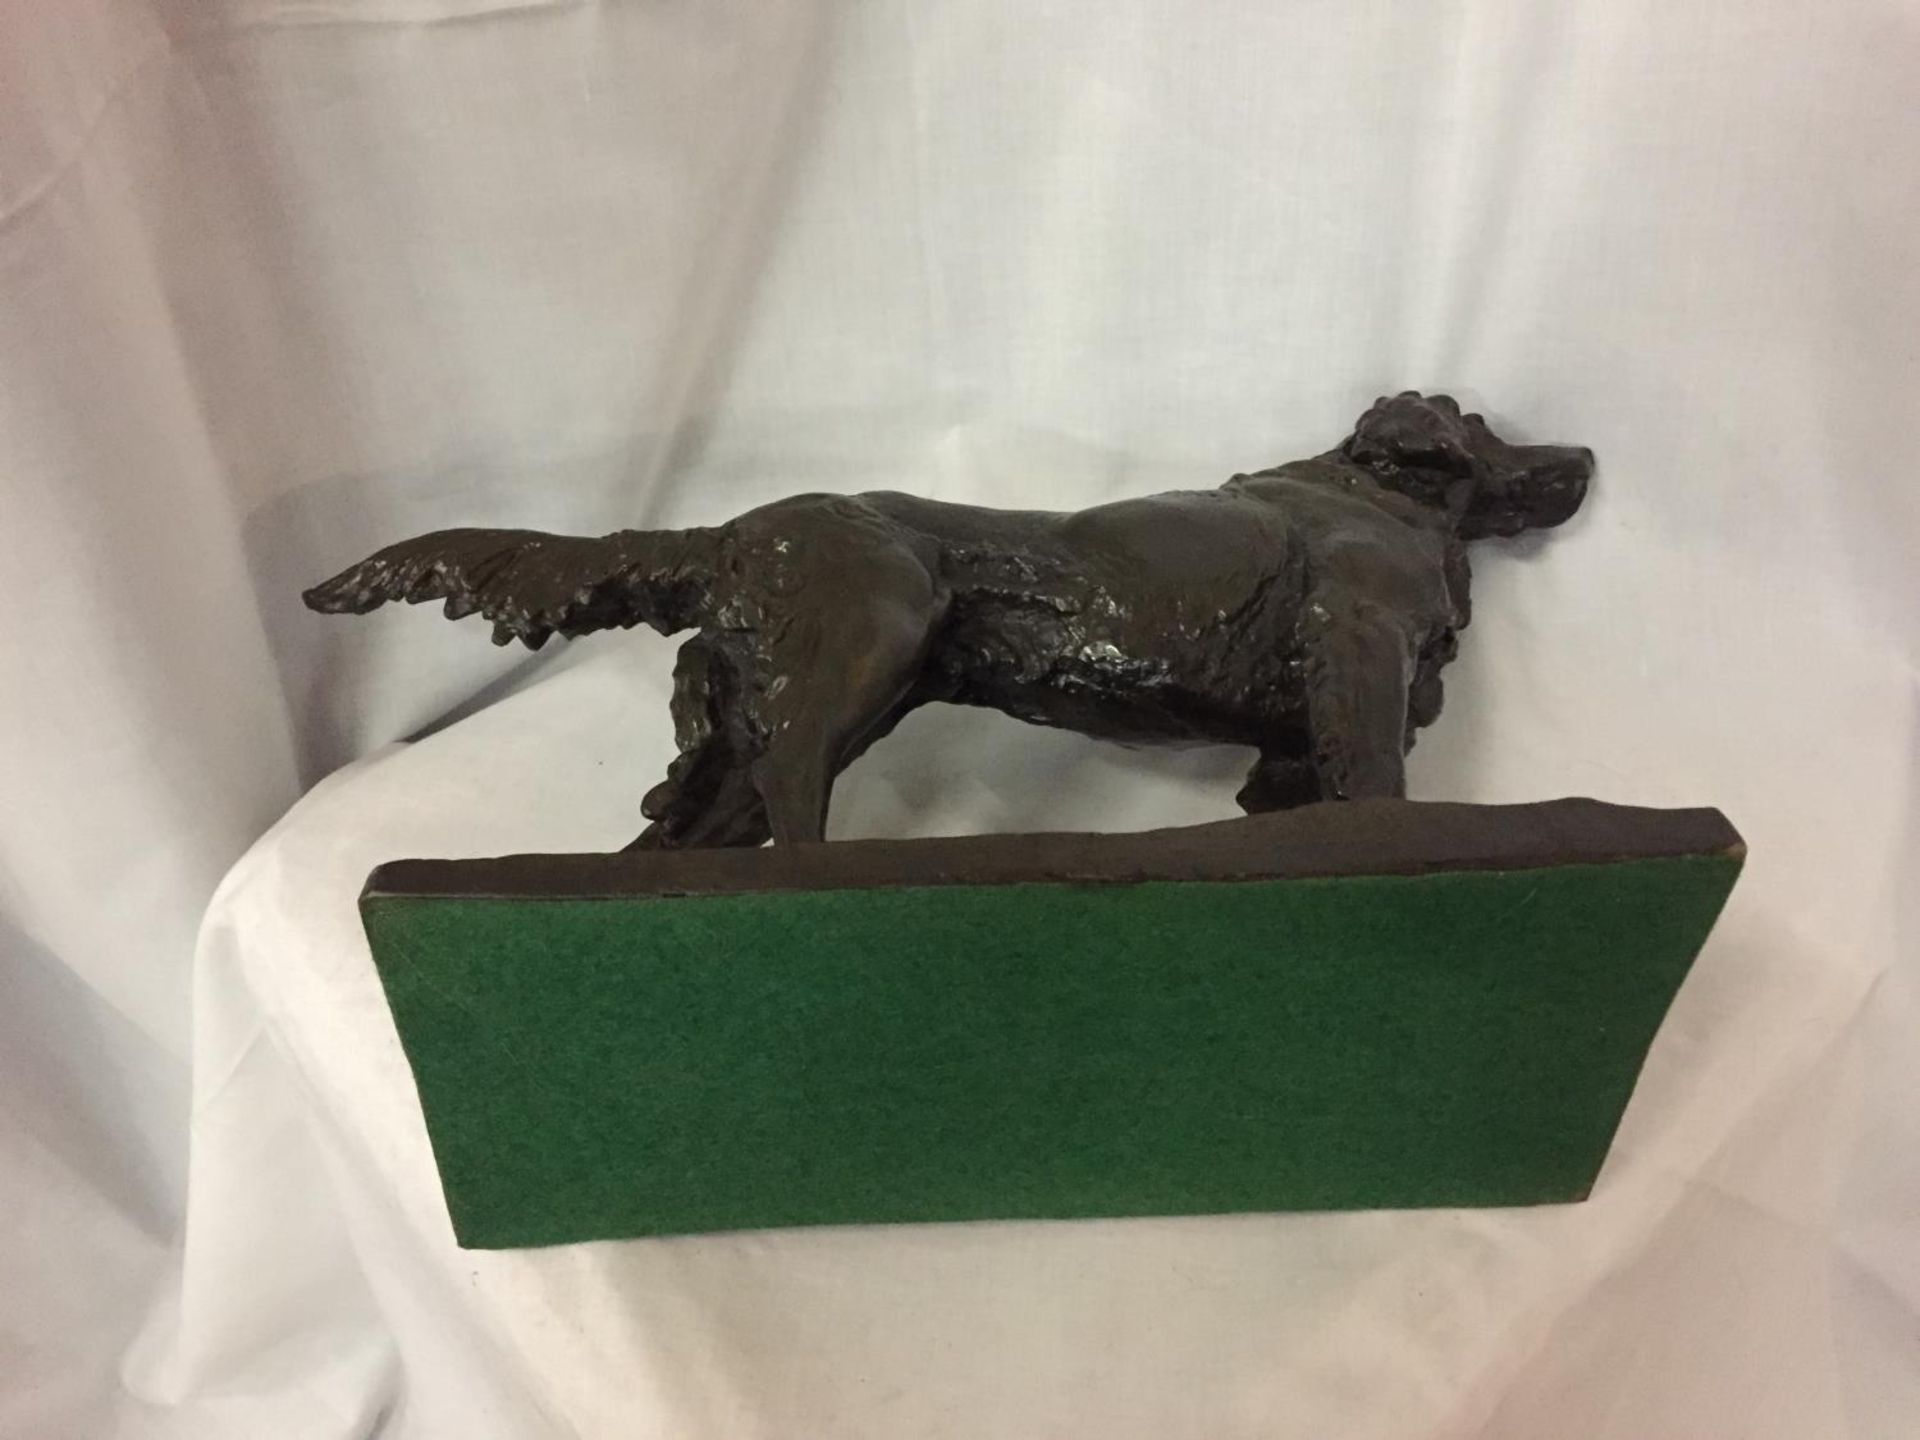 A BRONZE STYLE SCULPTURE OF A RETREIVER DOG. LENGTH 51CM, HEIGHT 35CM - Image 4 of 6